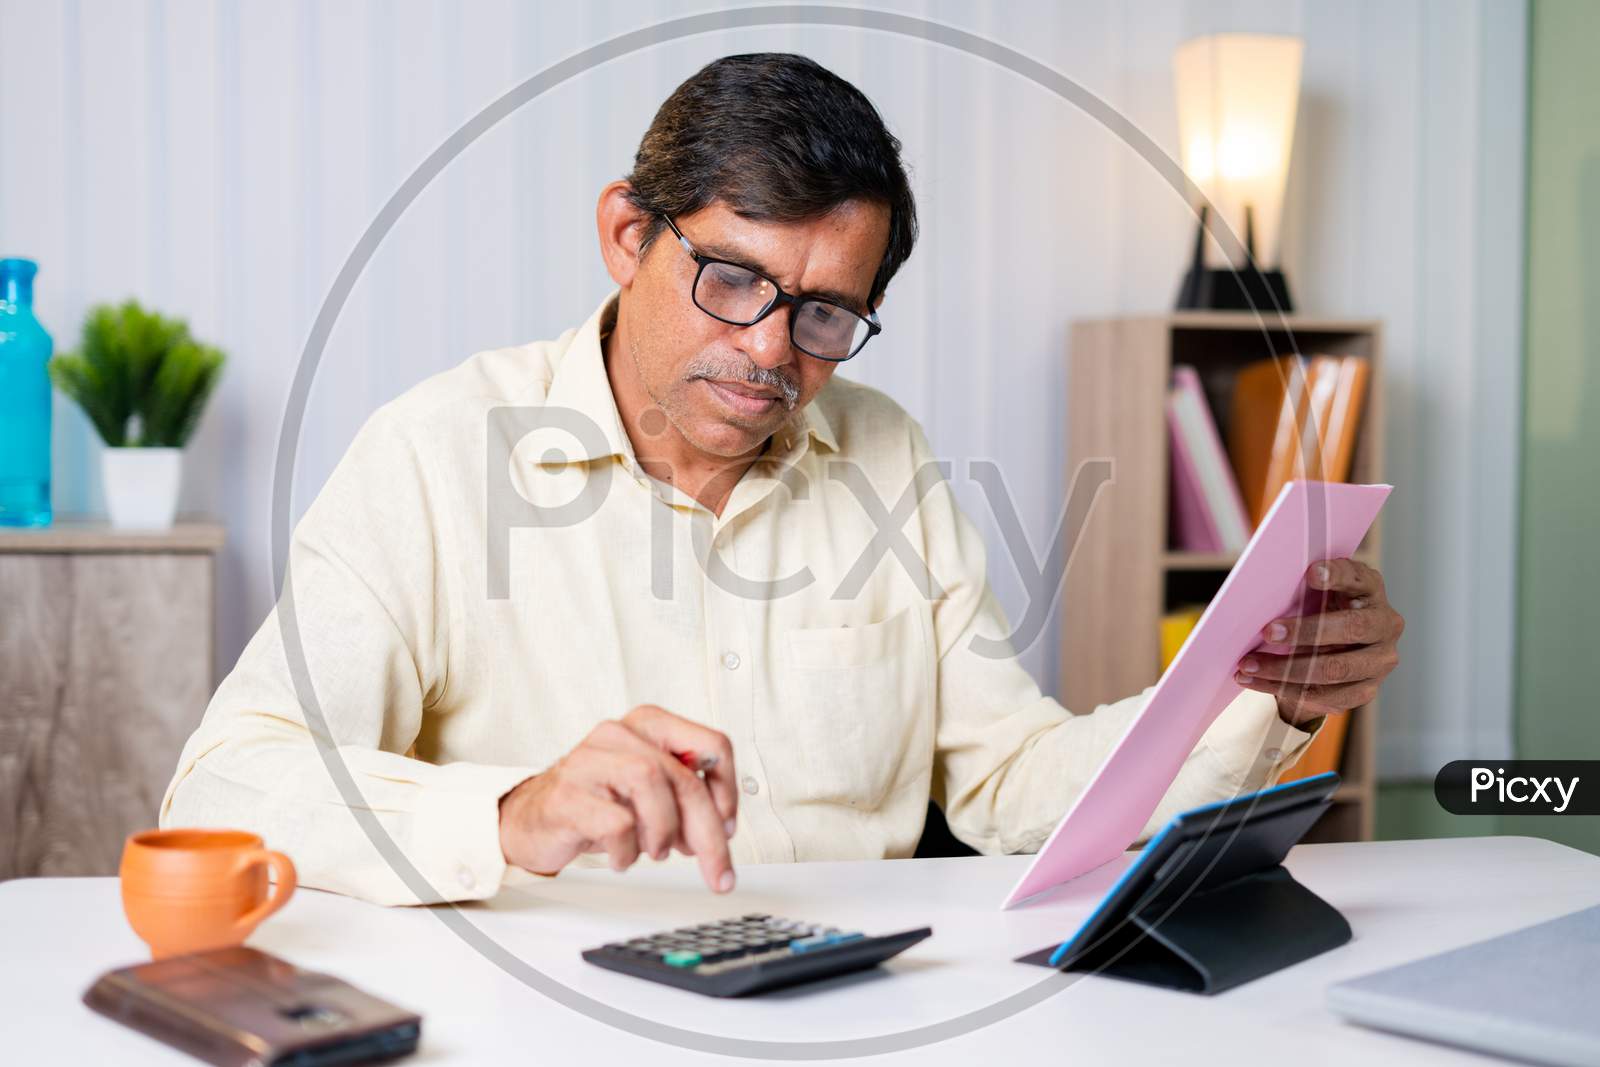 Businessman Checking Or Verifying Bills, Expenses Or Taxes And Calculating Be Seeing Bills And Calculator At Office - Concept Of Managing Budget And Financial Work.